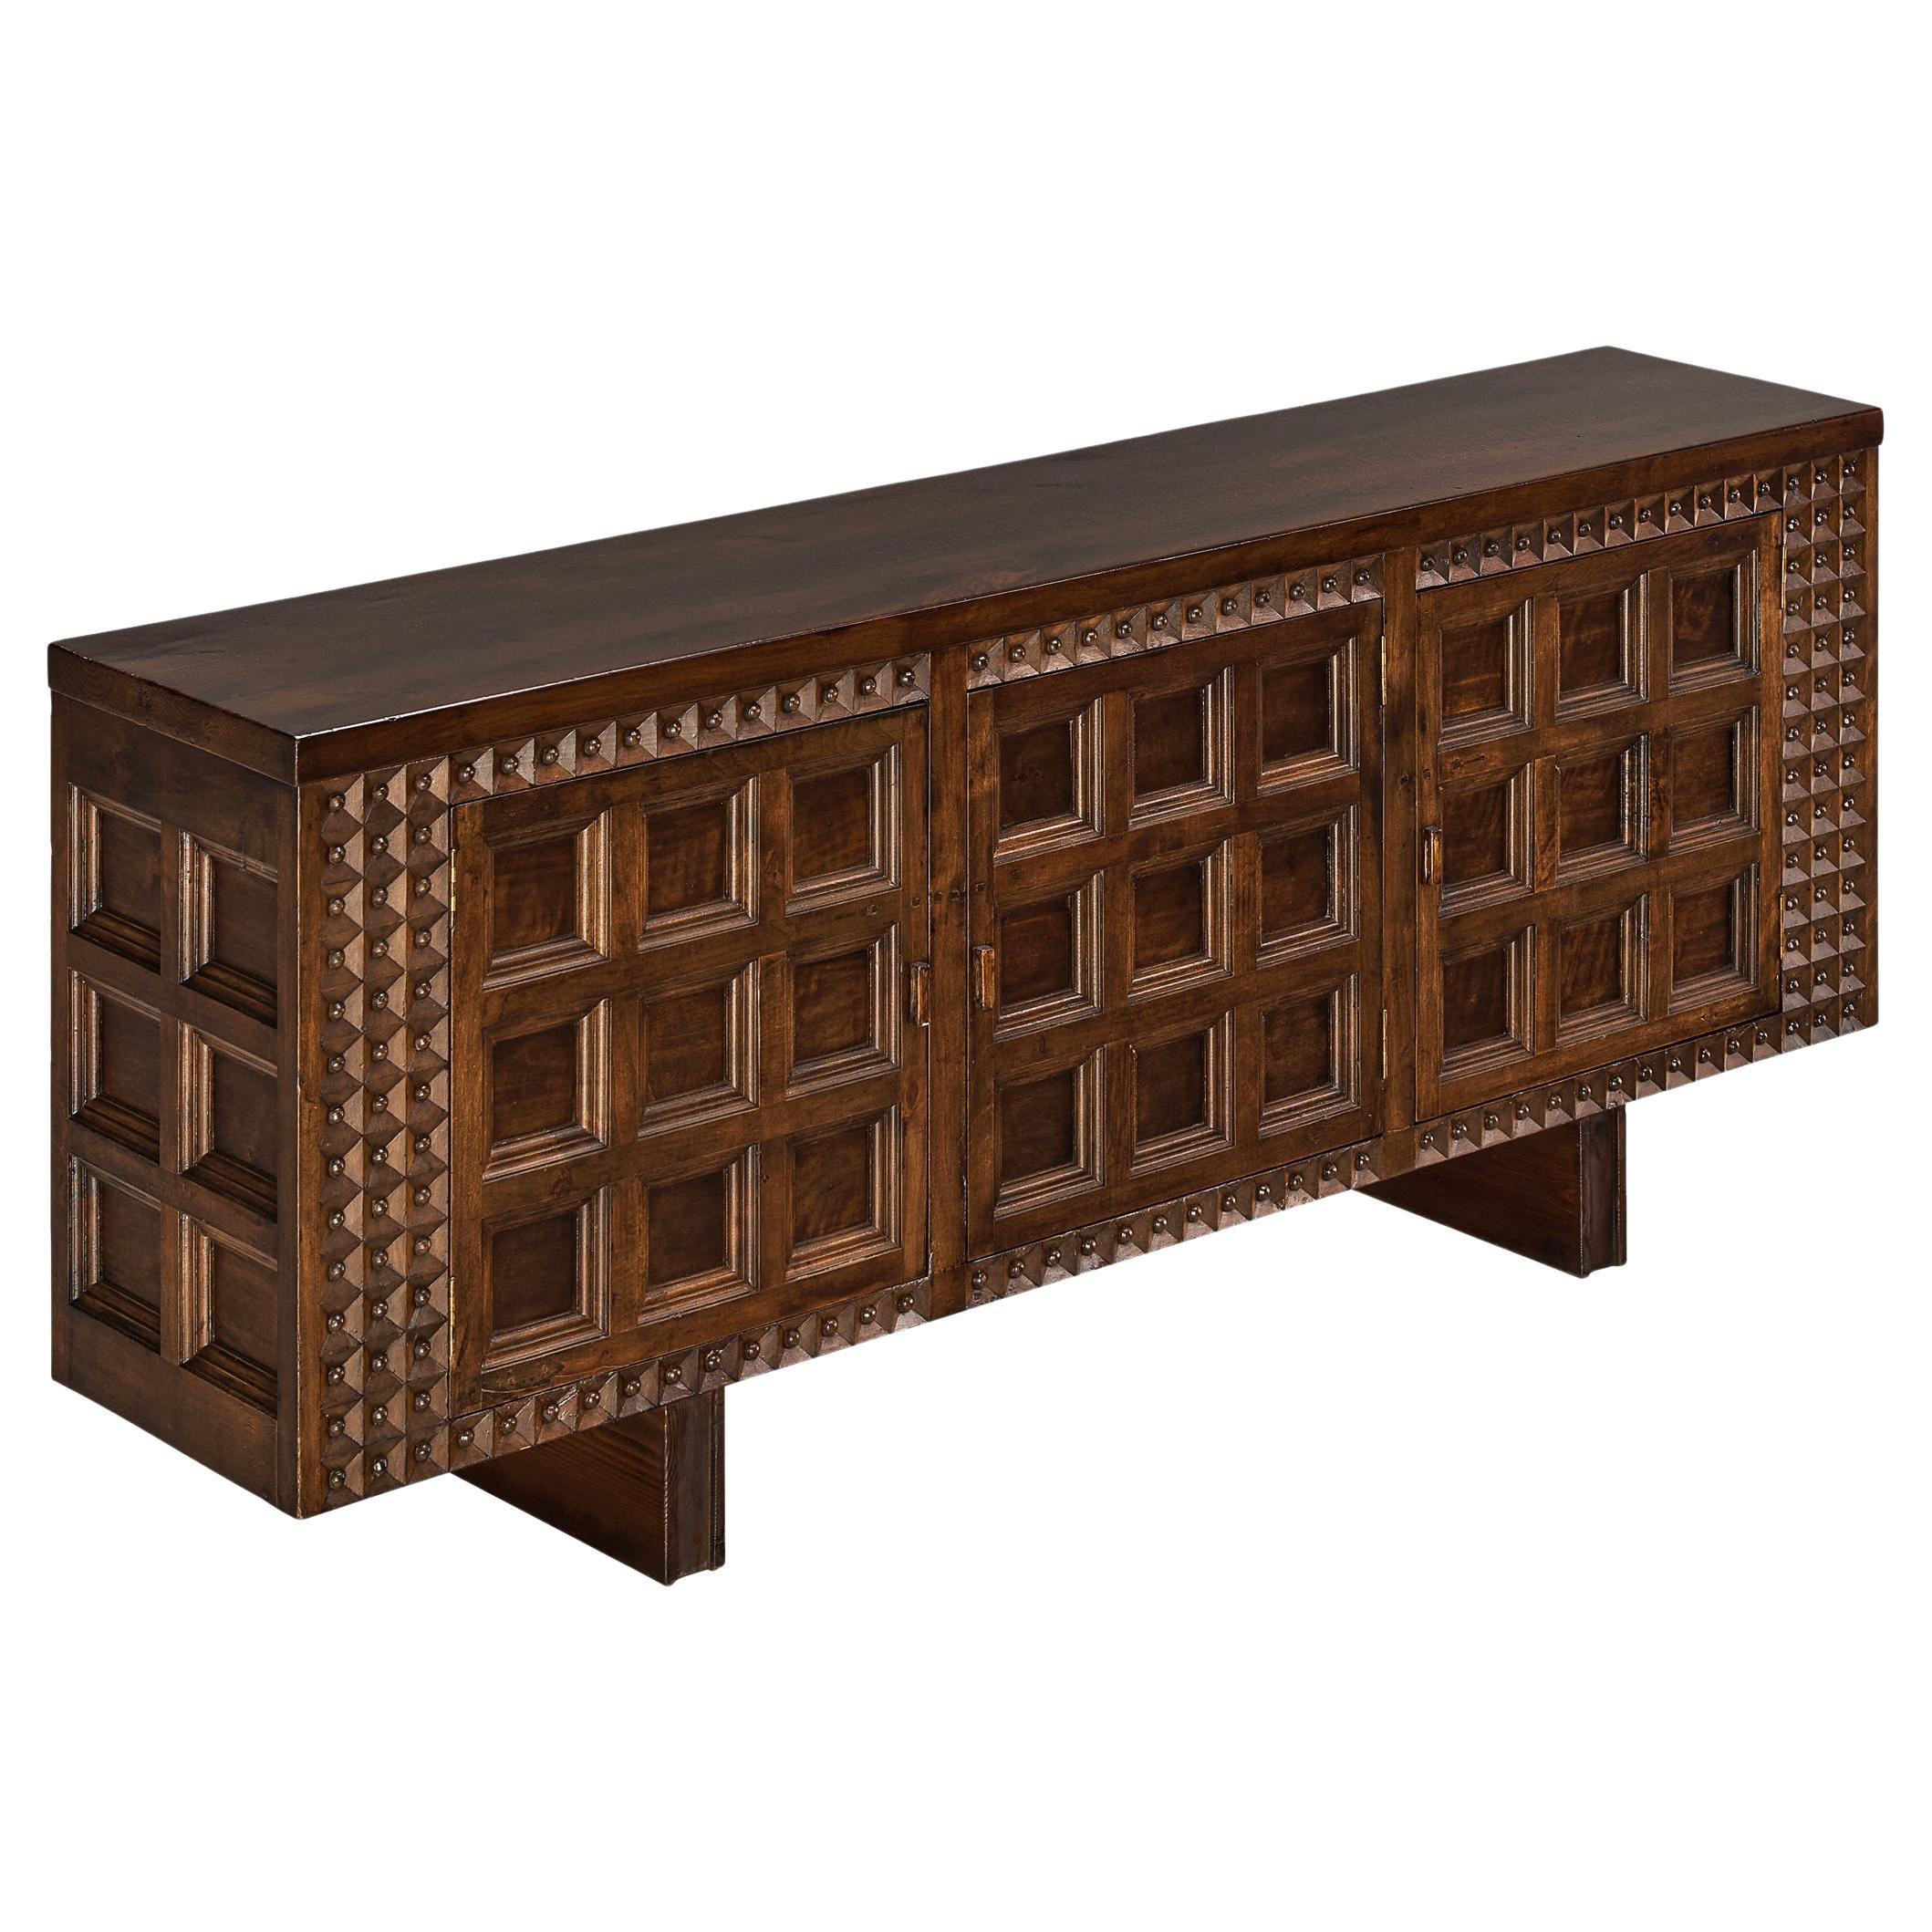 Spanish Brutalist Sideboard with Sophisticated Carvings in Maple 